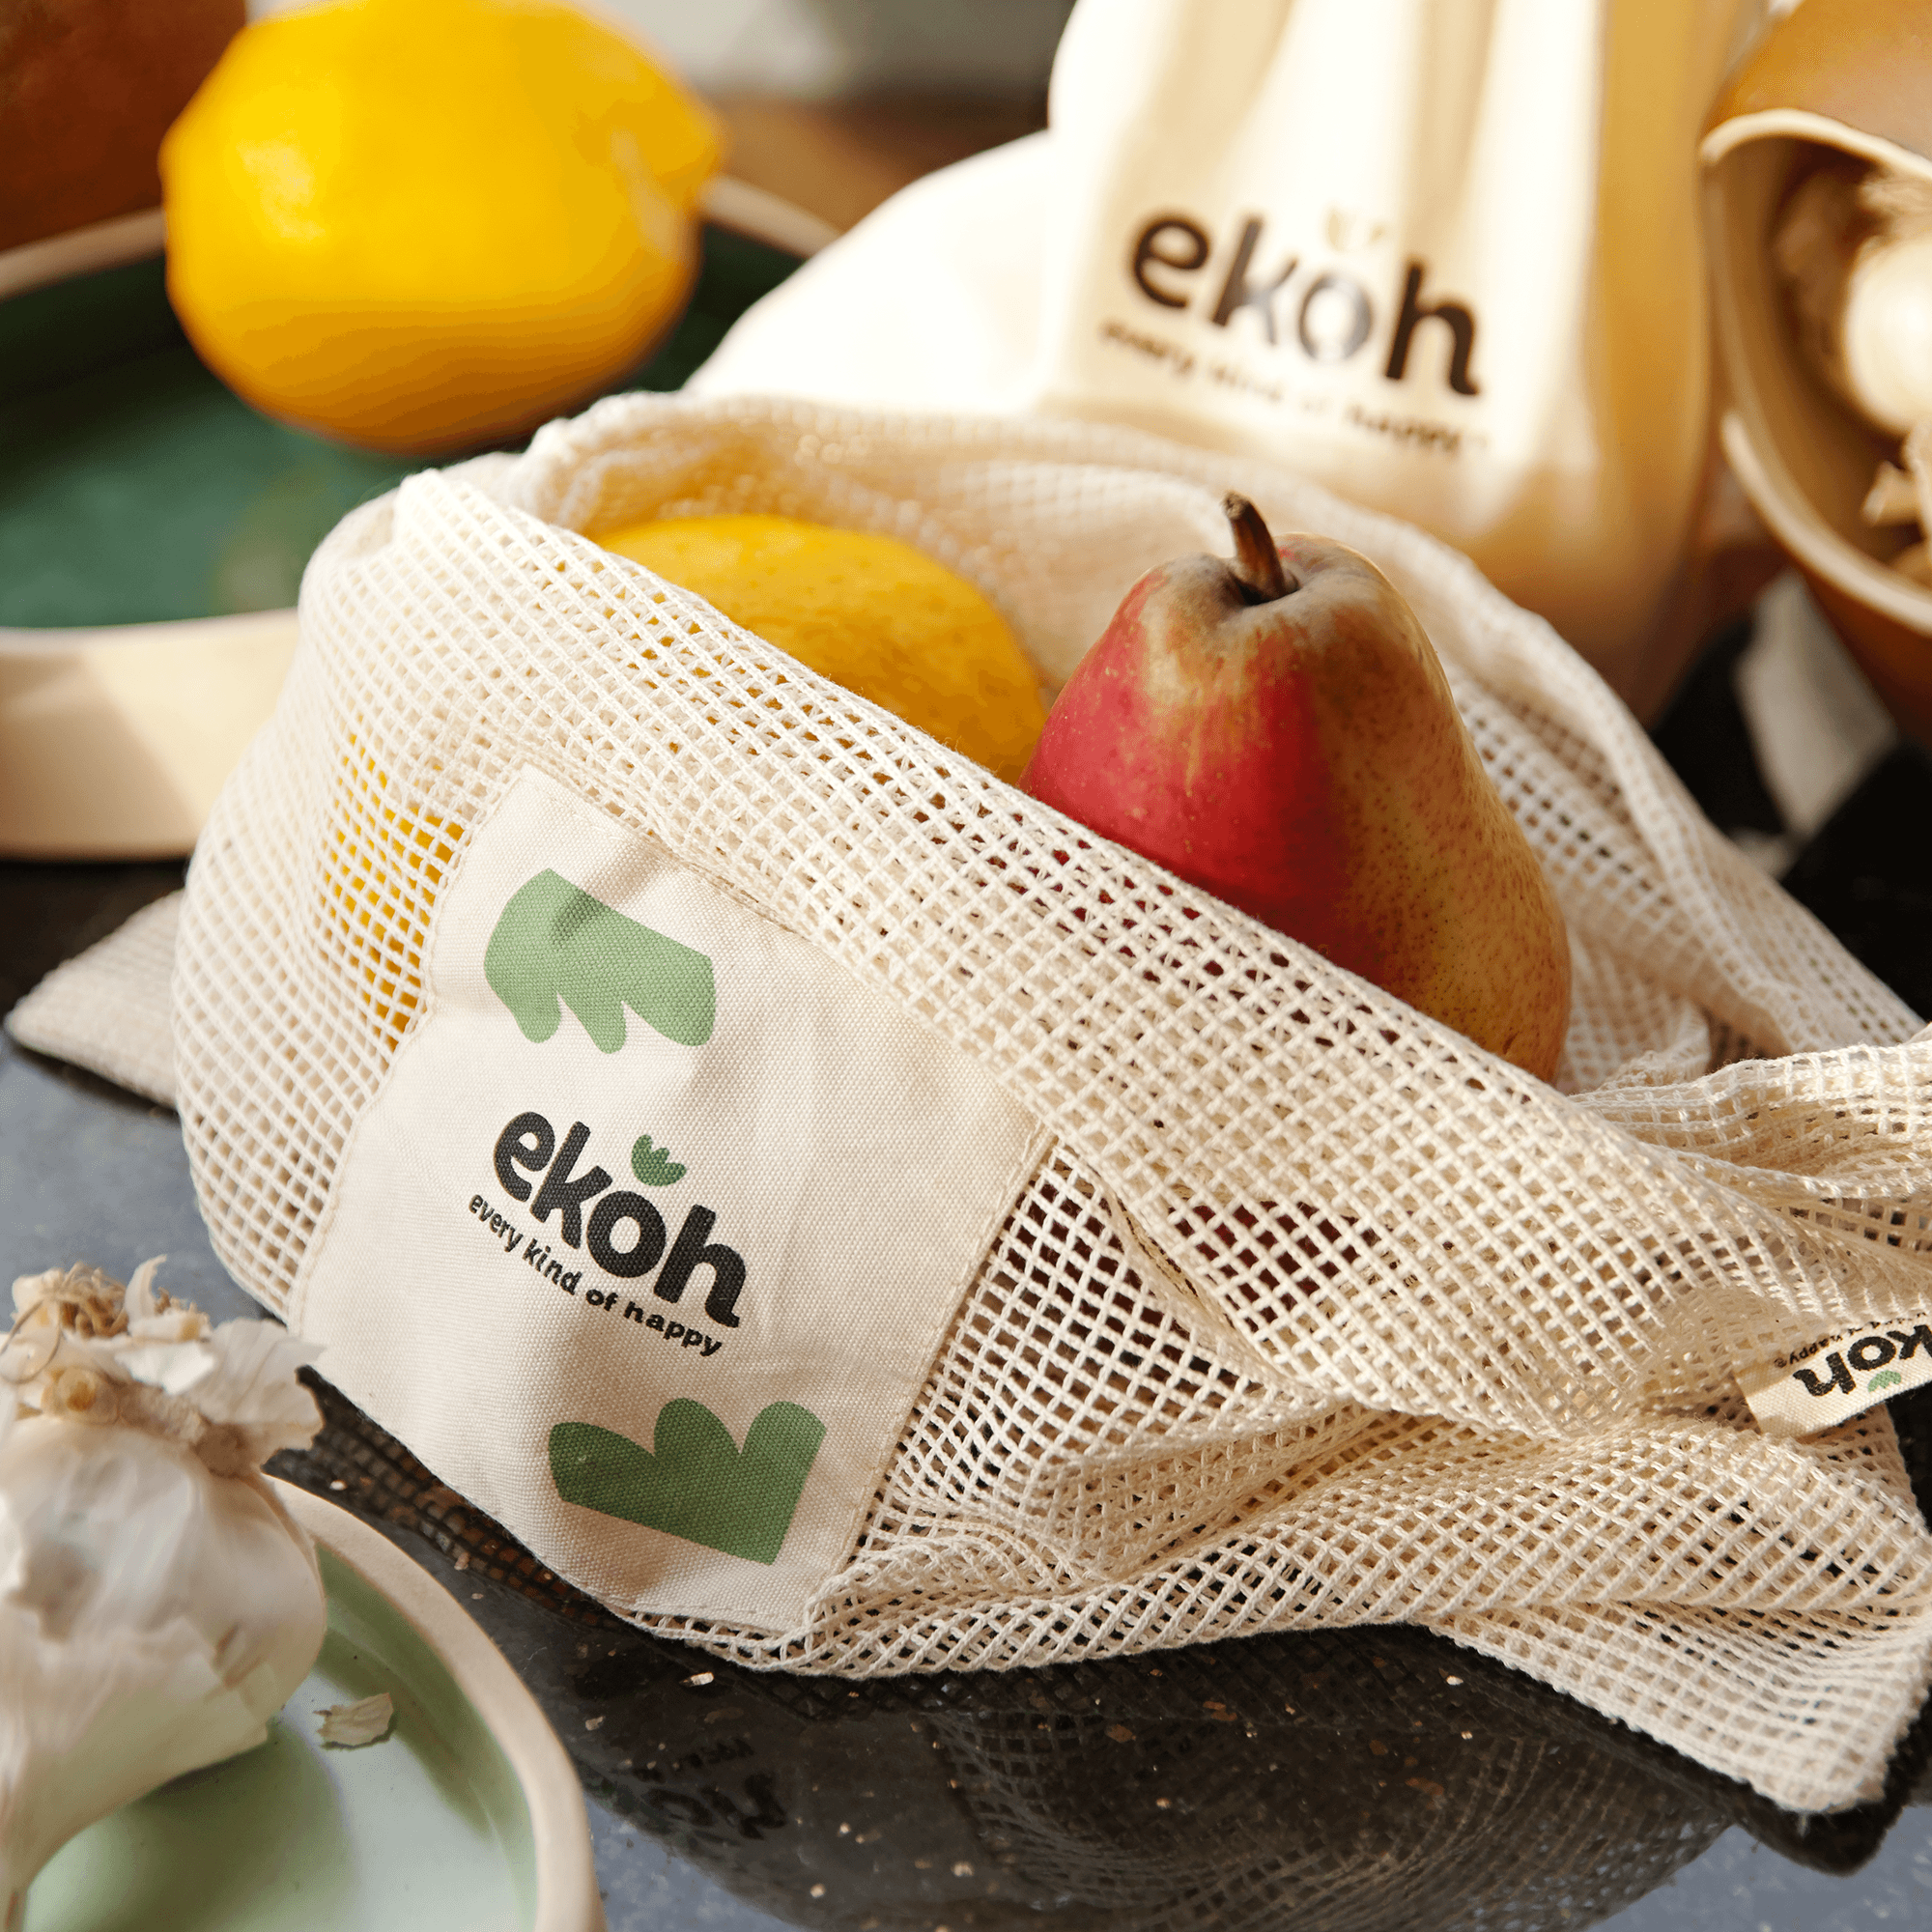 Go Green Trio Bundle-Thermal Tote, Grocery Bags and Carry Pod, and Reusable  Produce Bag Pattern Bundle — RLR Creations